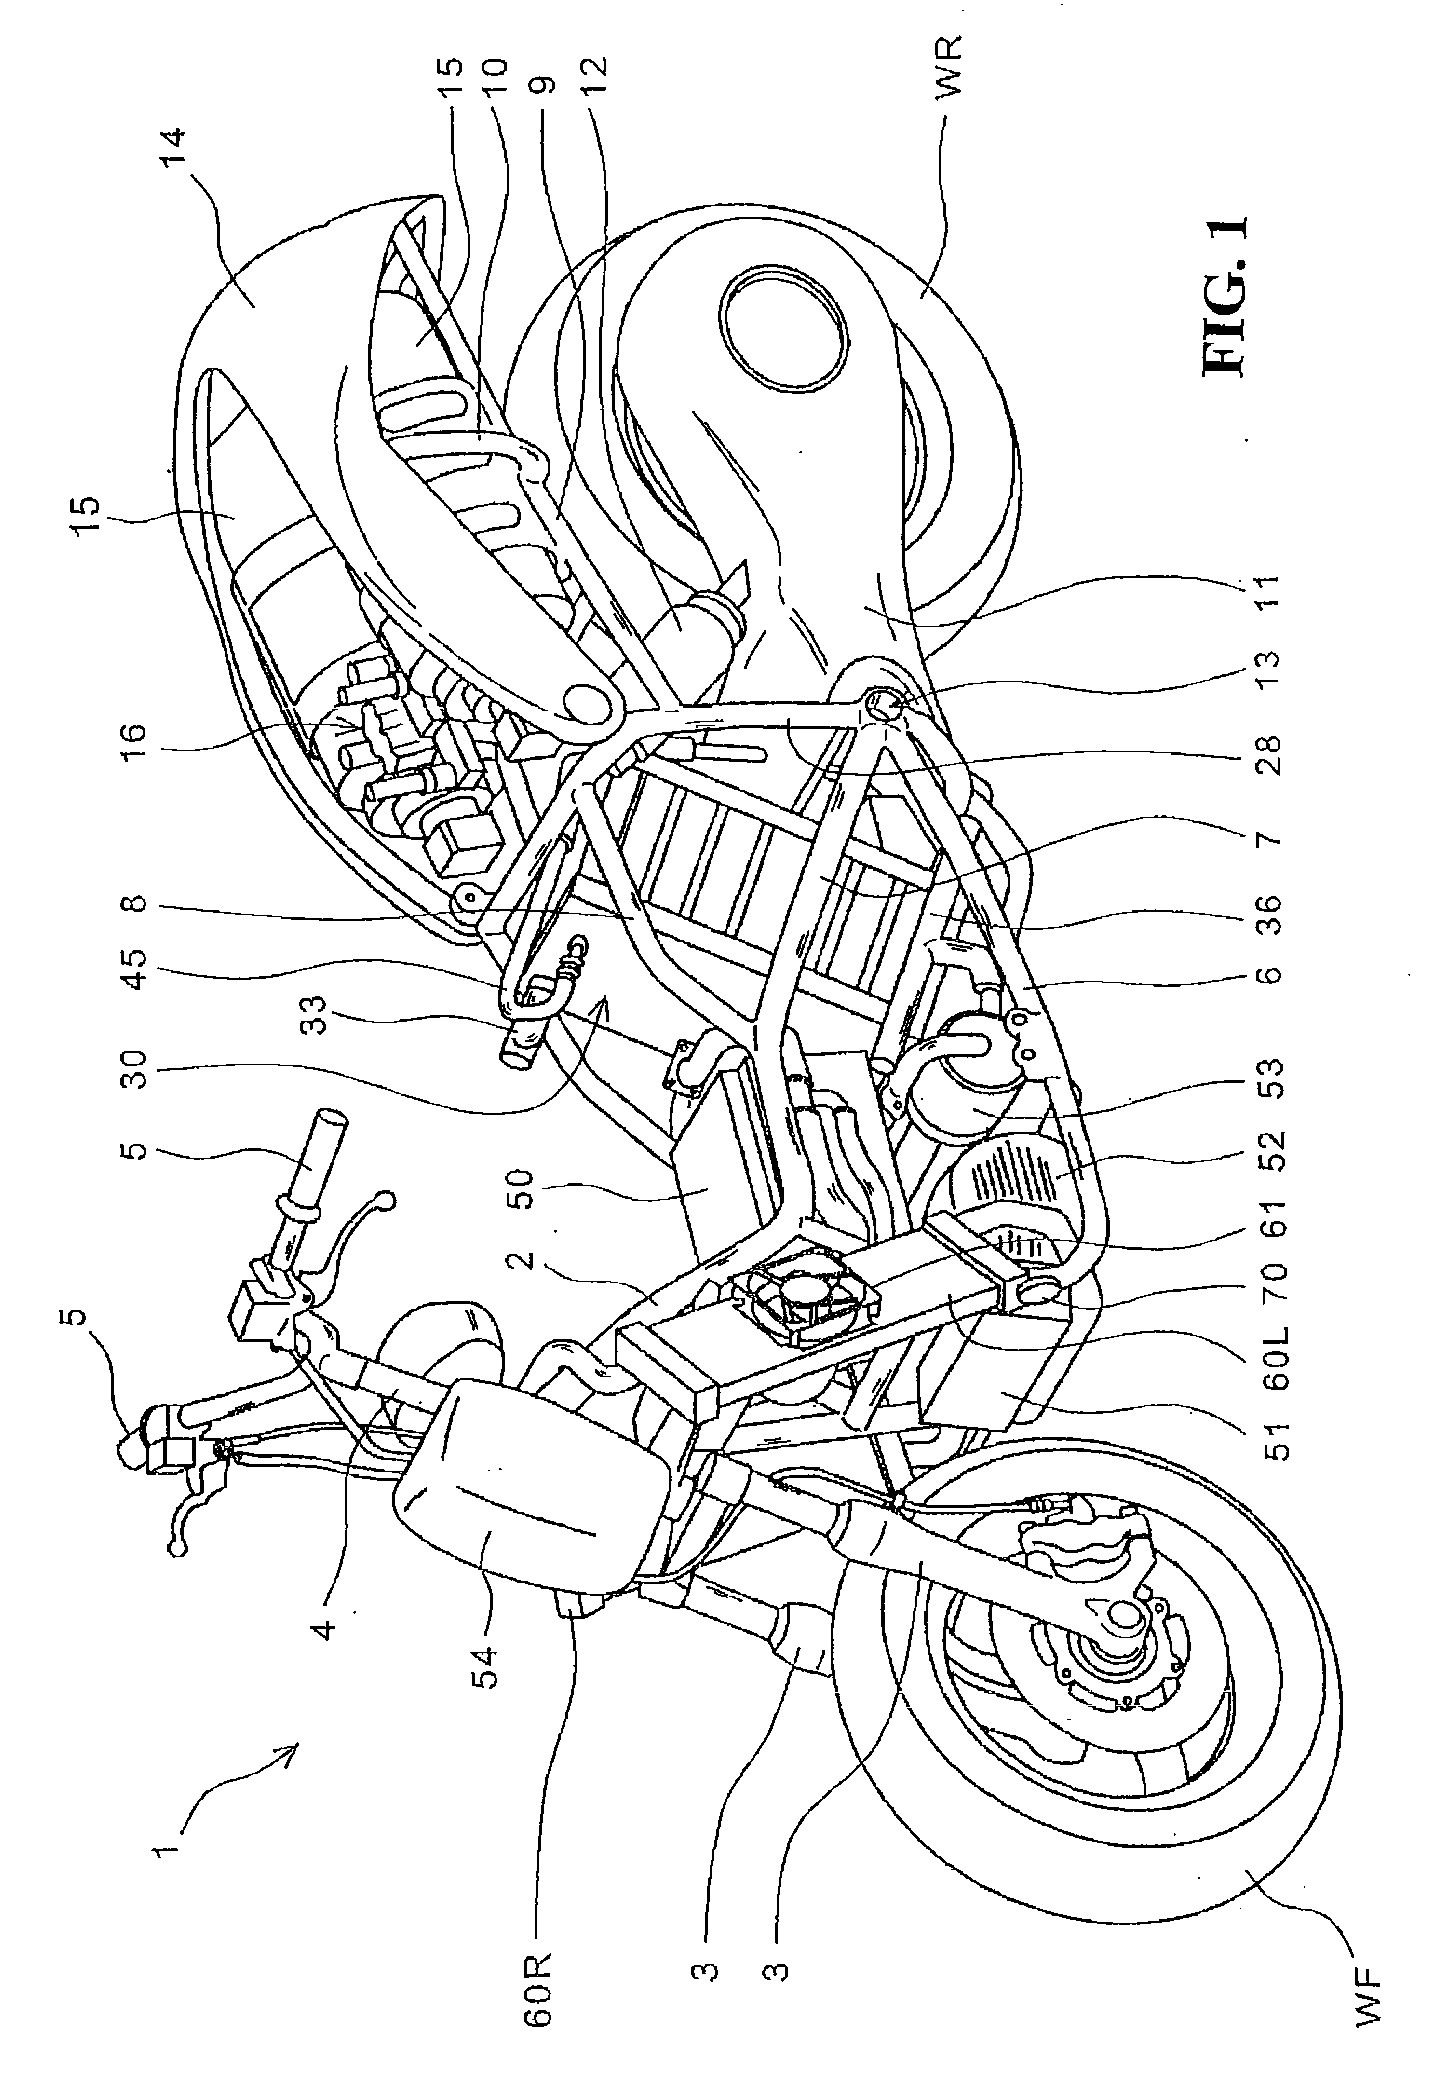 Saddle ride, fuel cell powered vehicle